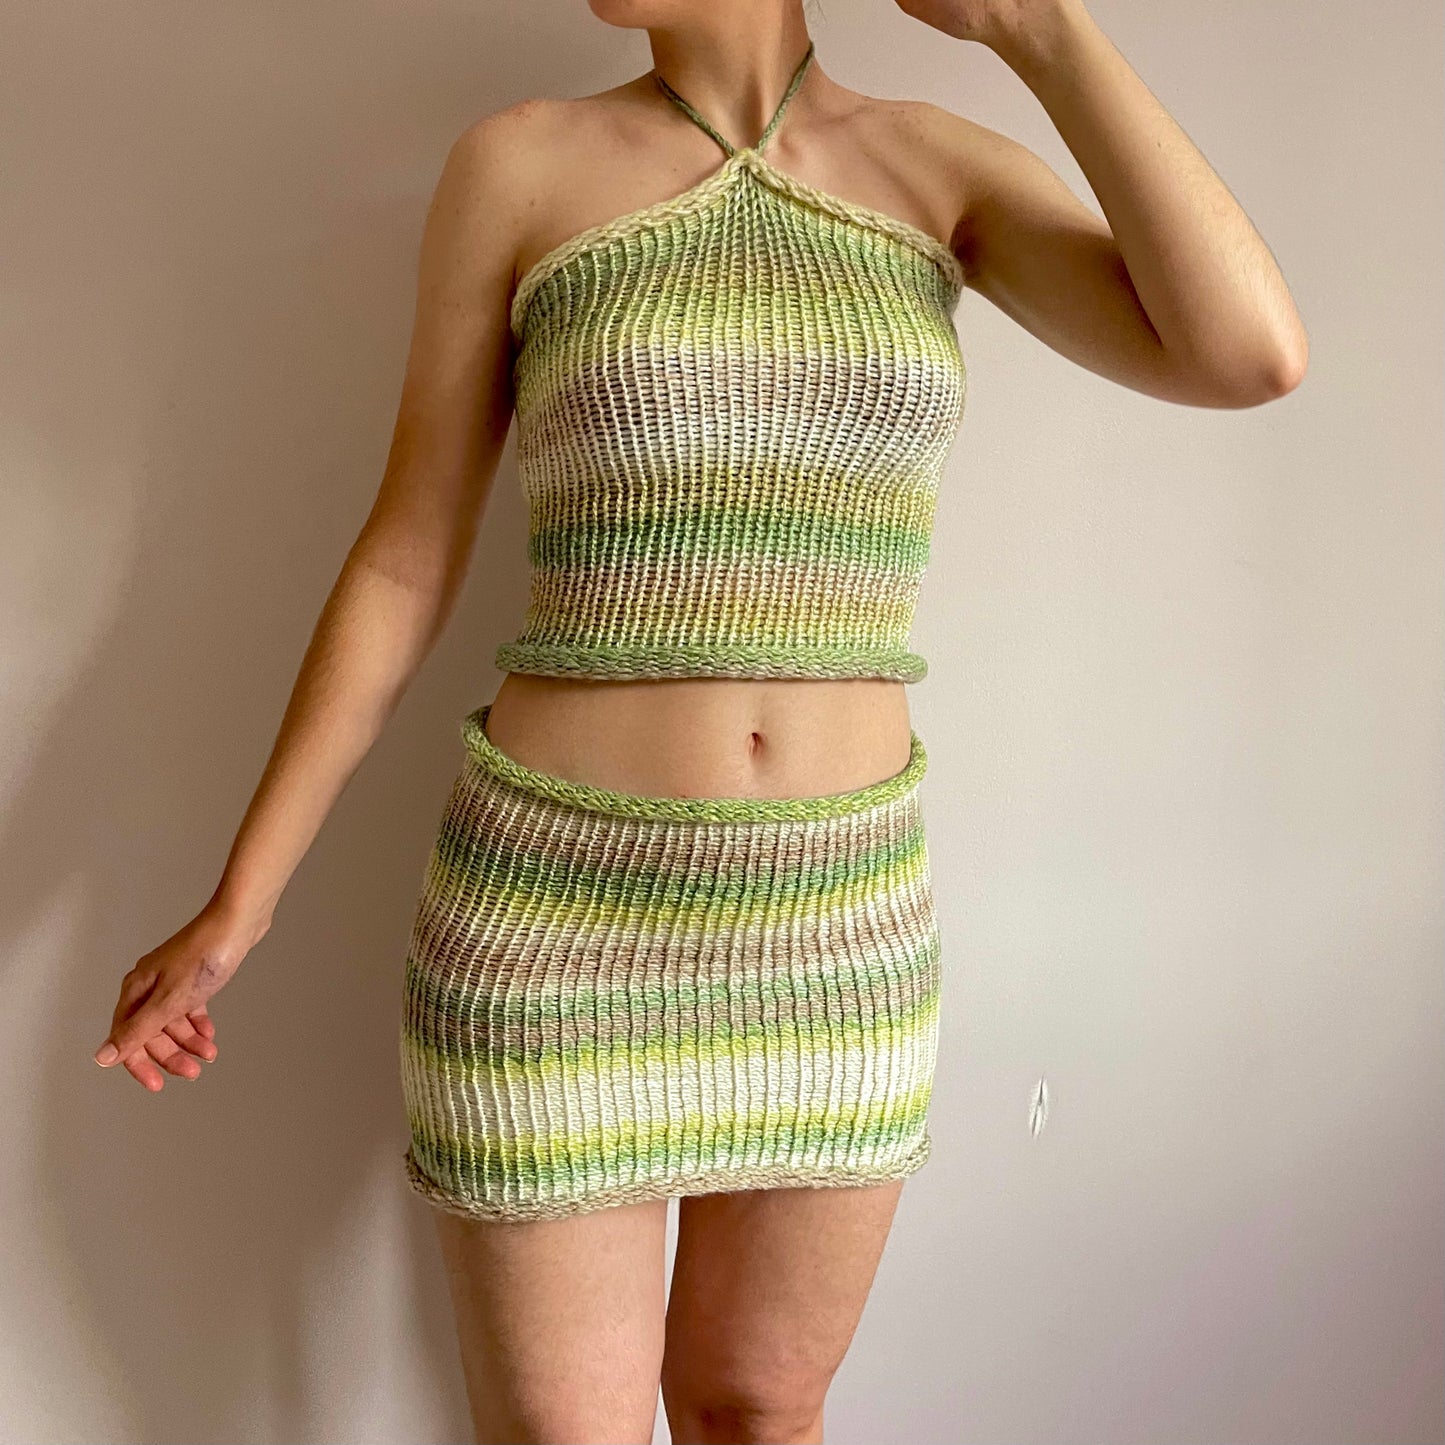 SET: Handmade knitted halter top and skirt in green, beige and cream